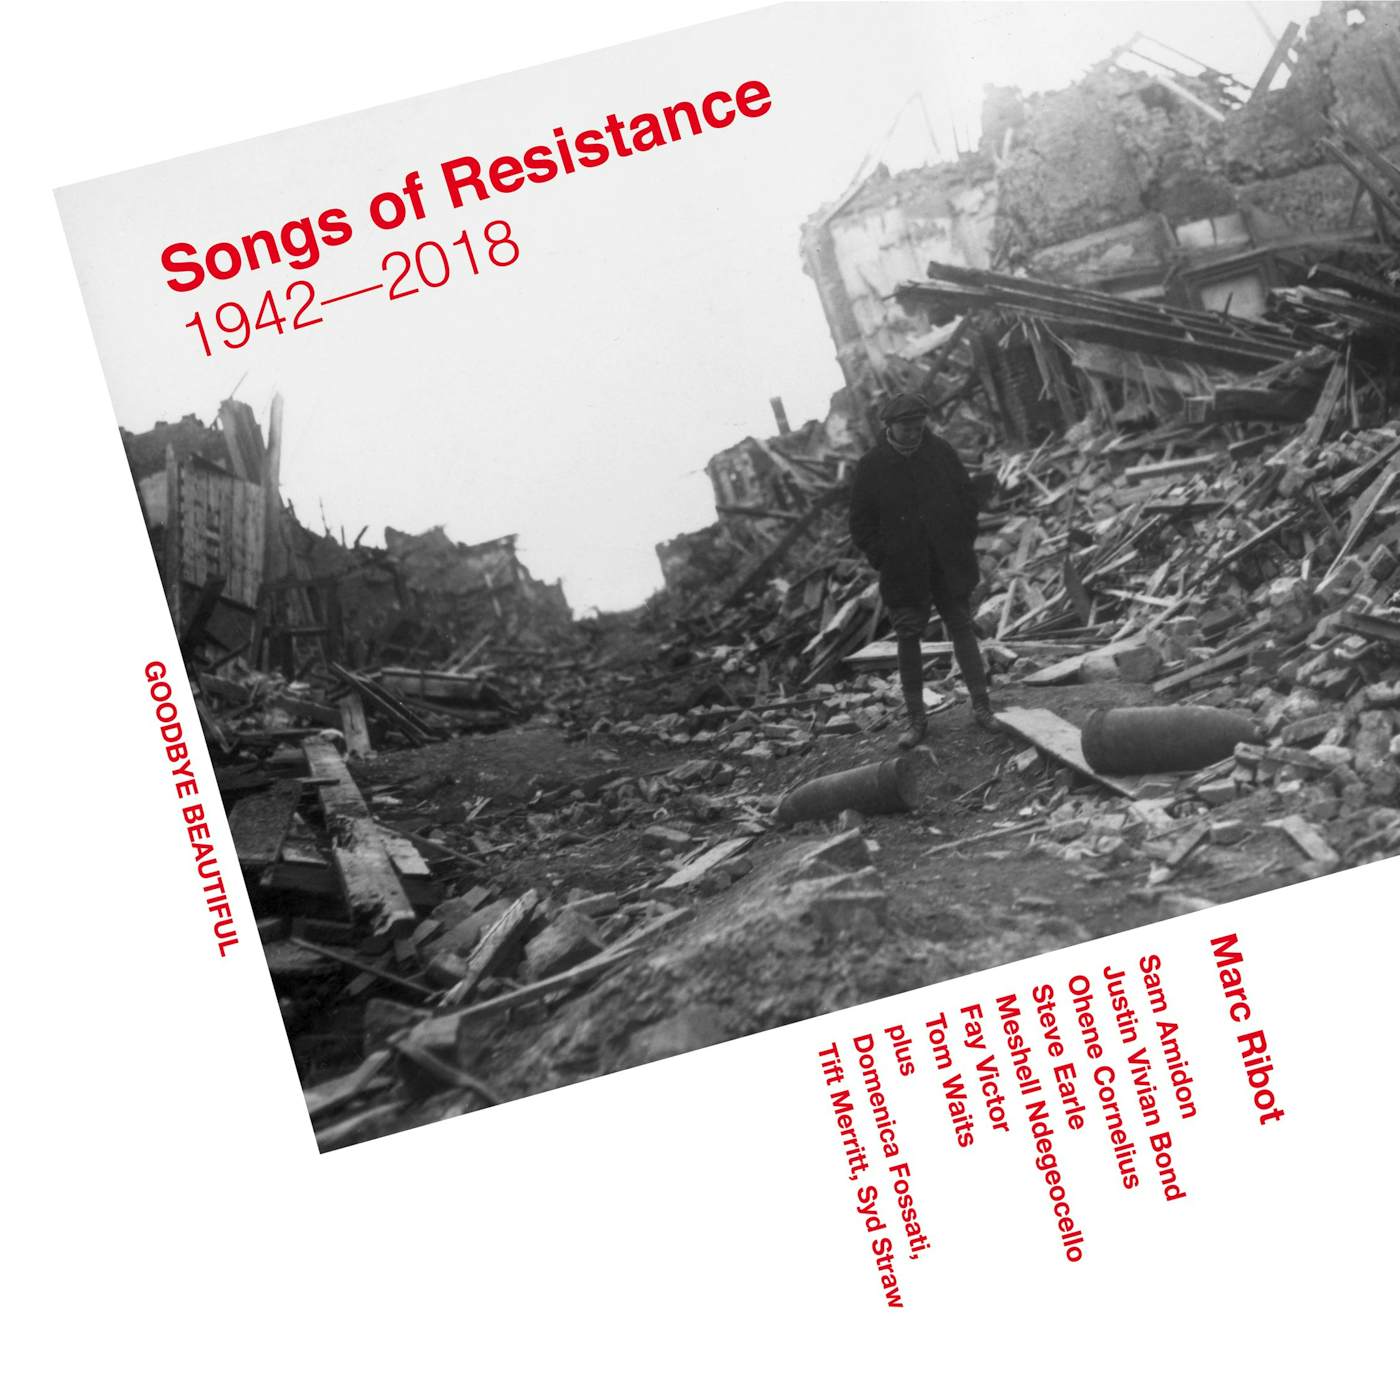 Marc Ribot Songs of Resistance 1942 - 2018 Vinyl Record